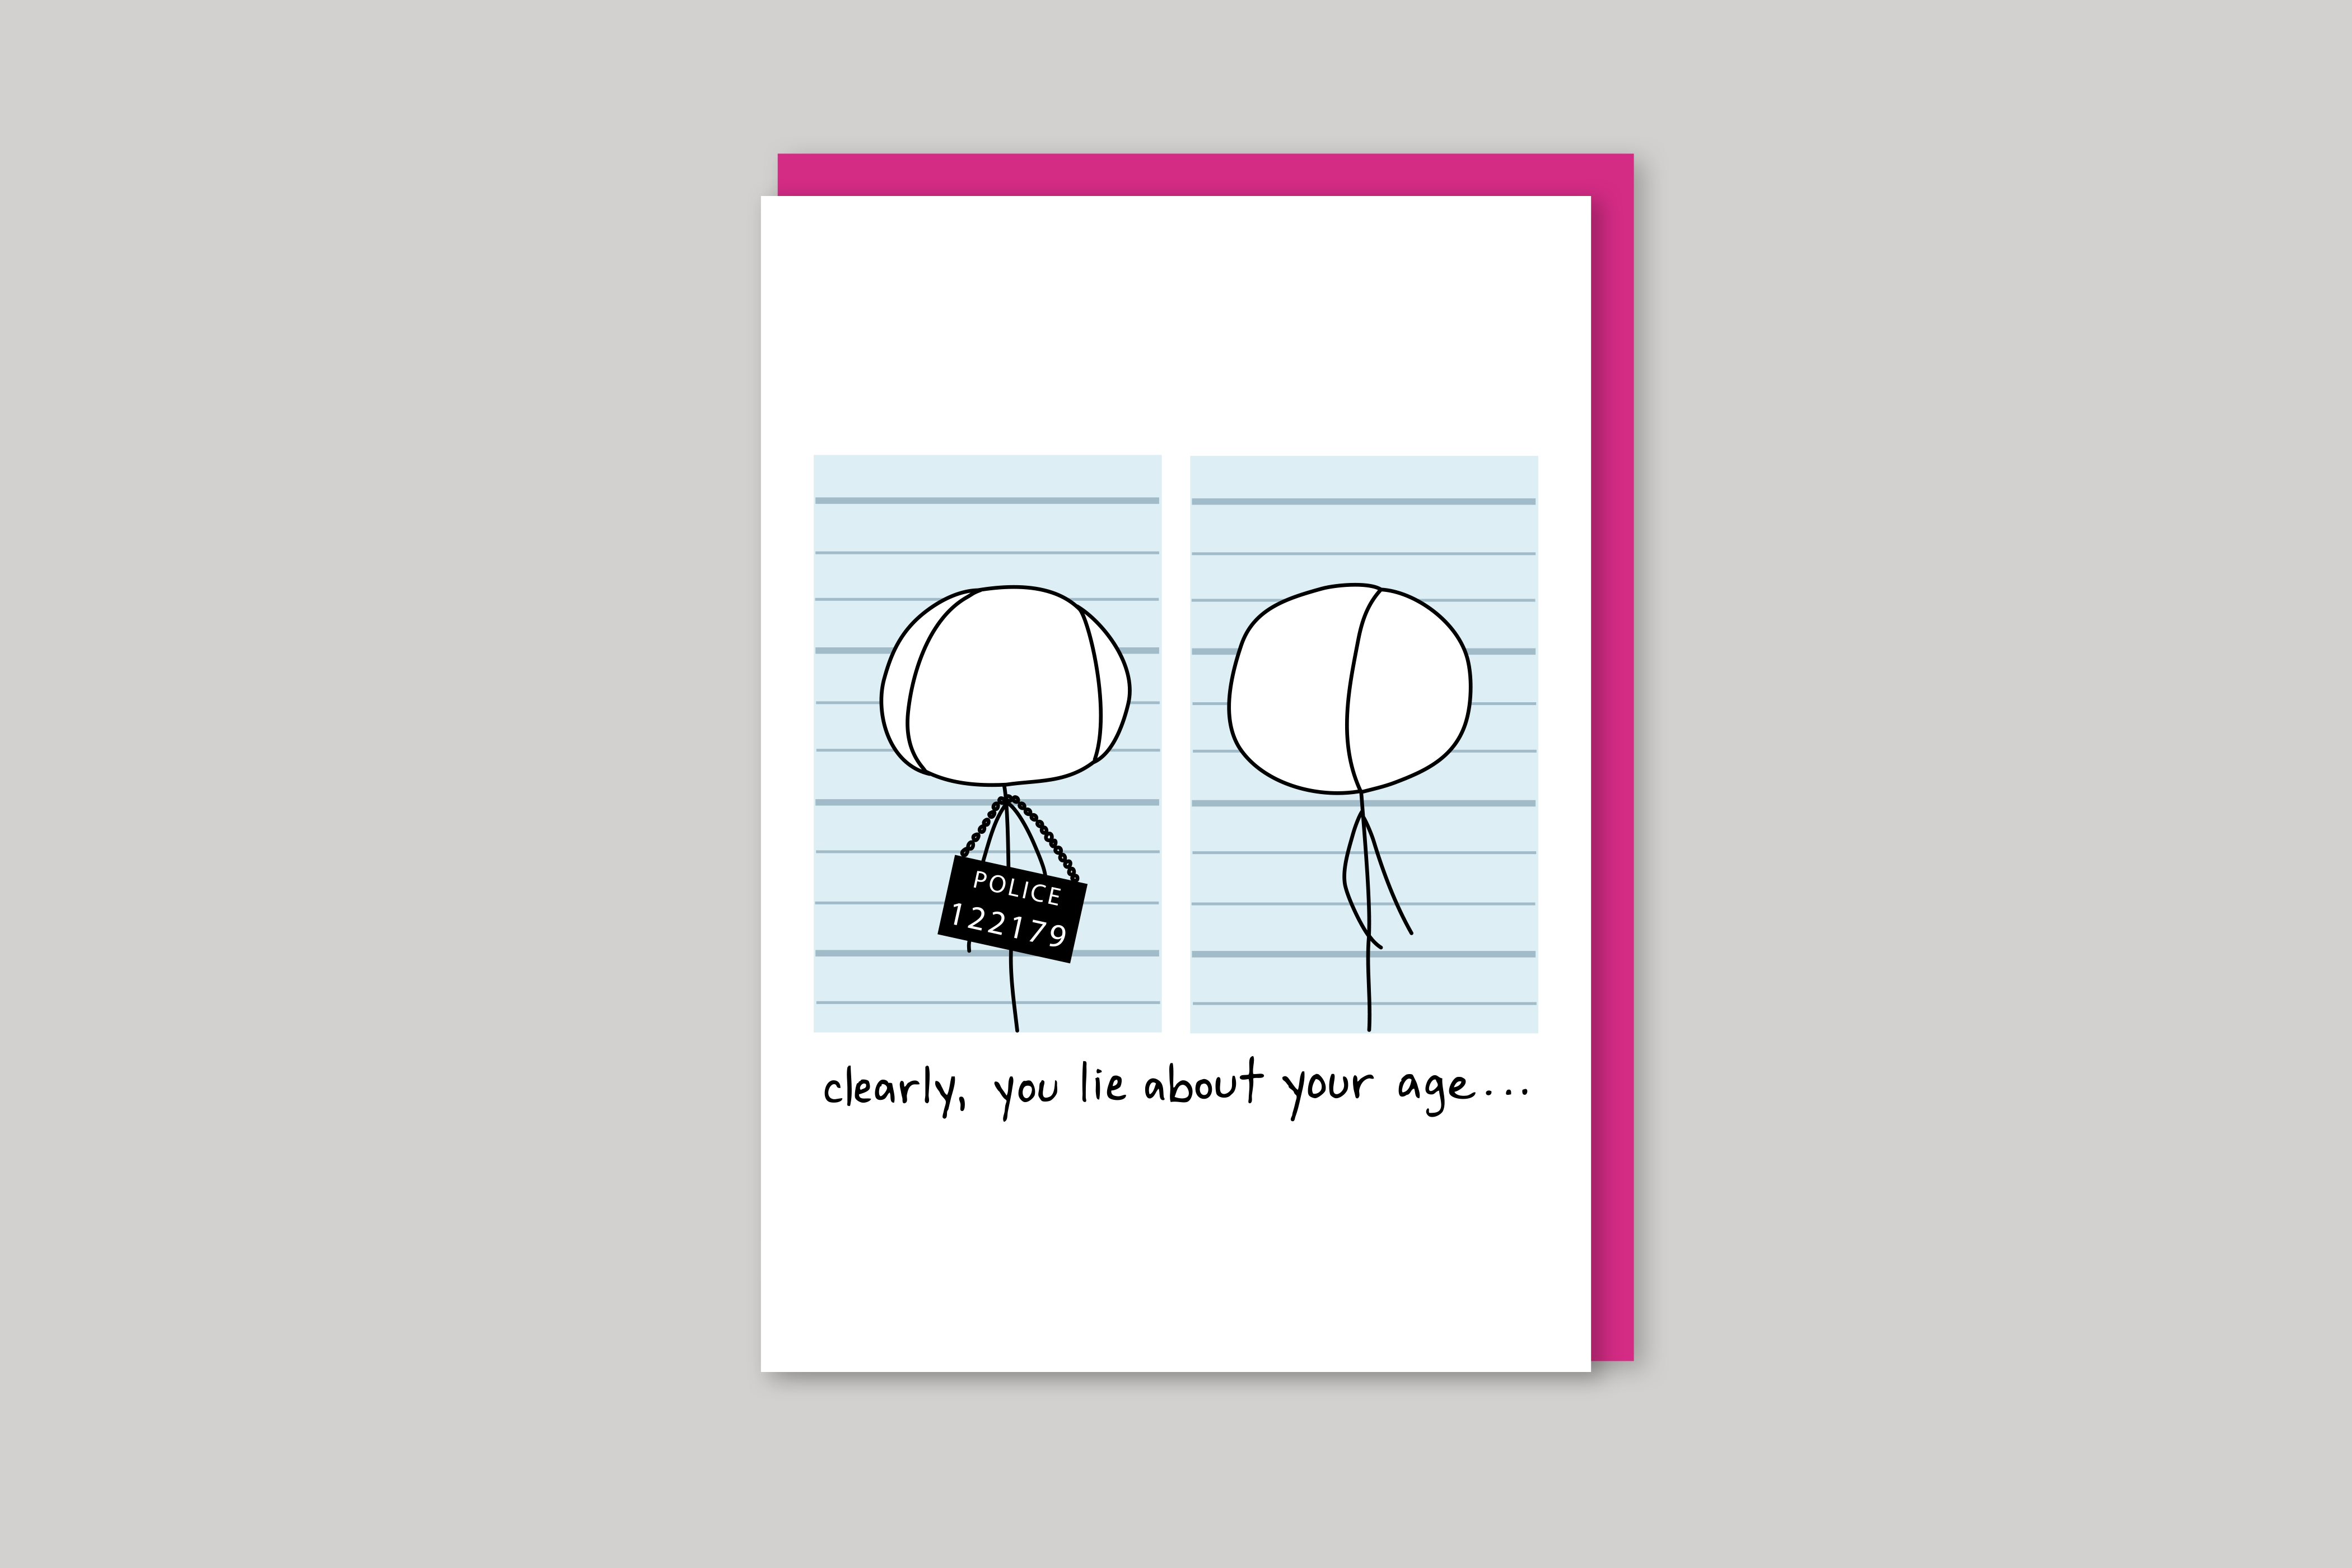 Liar humorous illustration from Mean Cards range of greeting cards by Icon, back page.